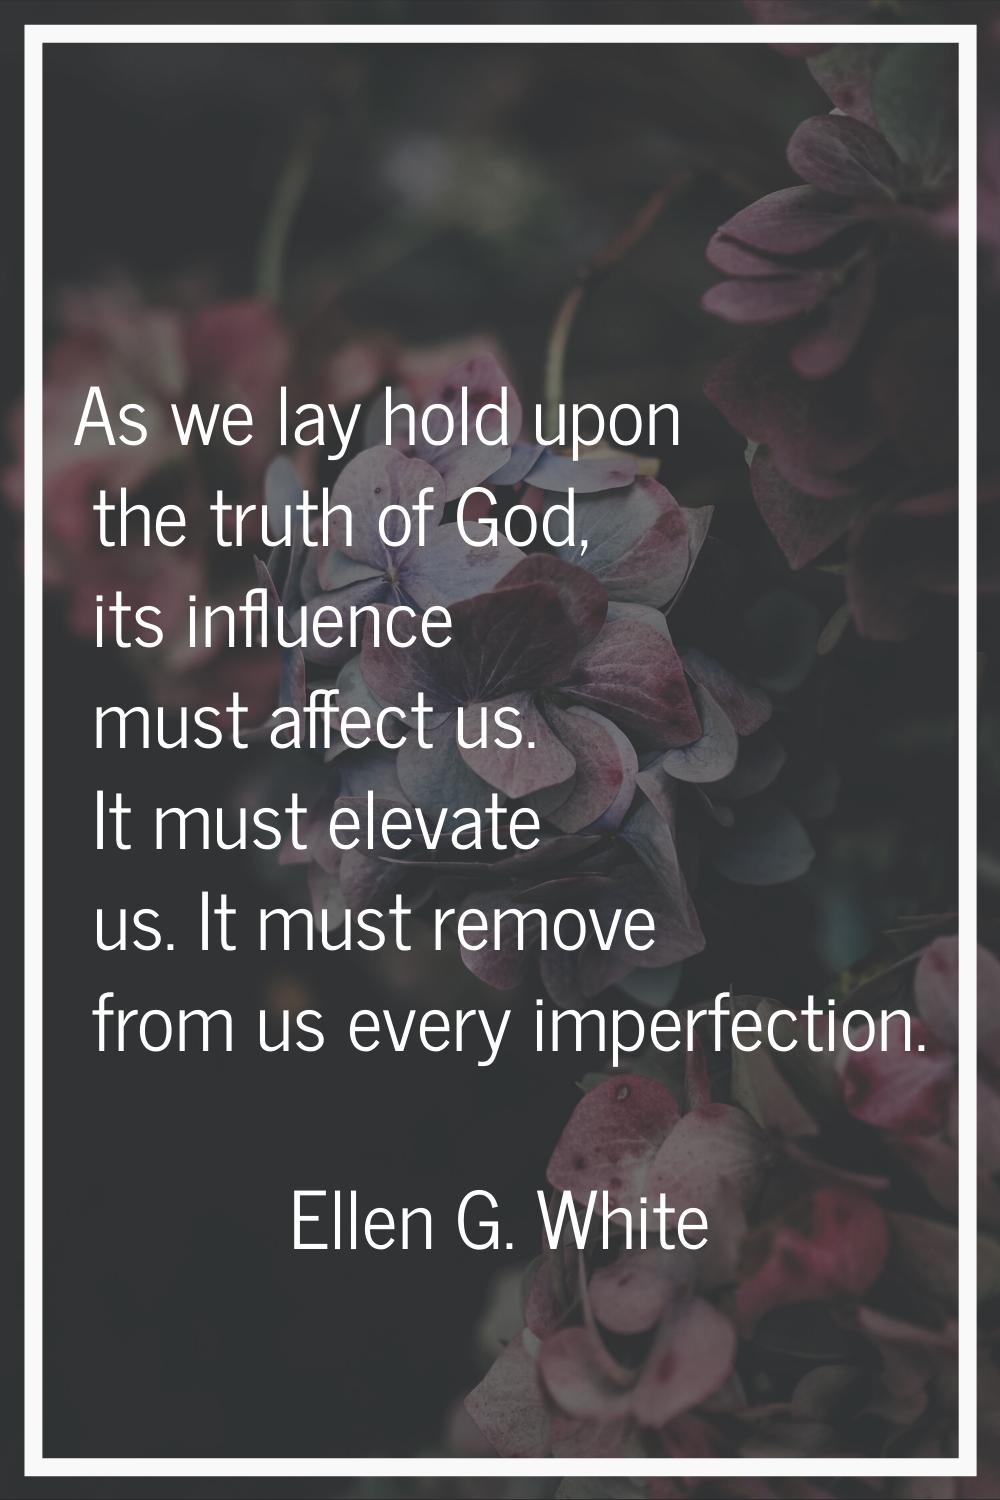 As we lay hold upon the truth of God, its influence must affect us. It must elevate us. It must rem